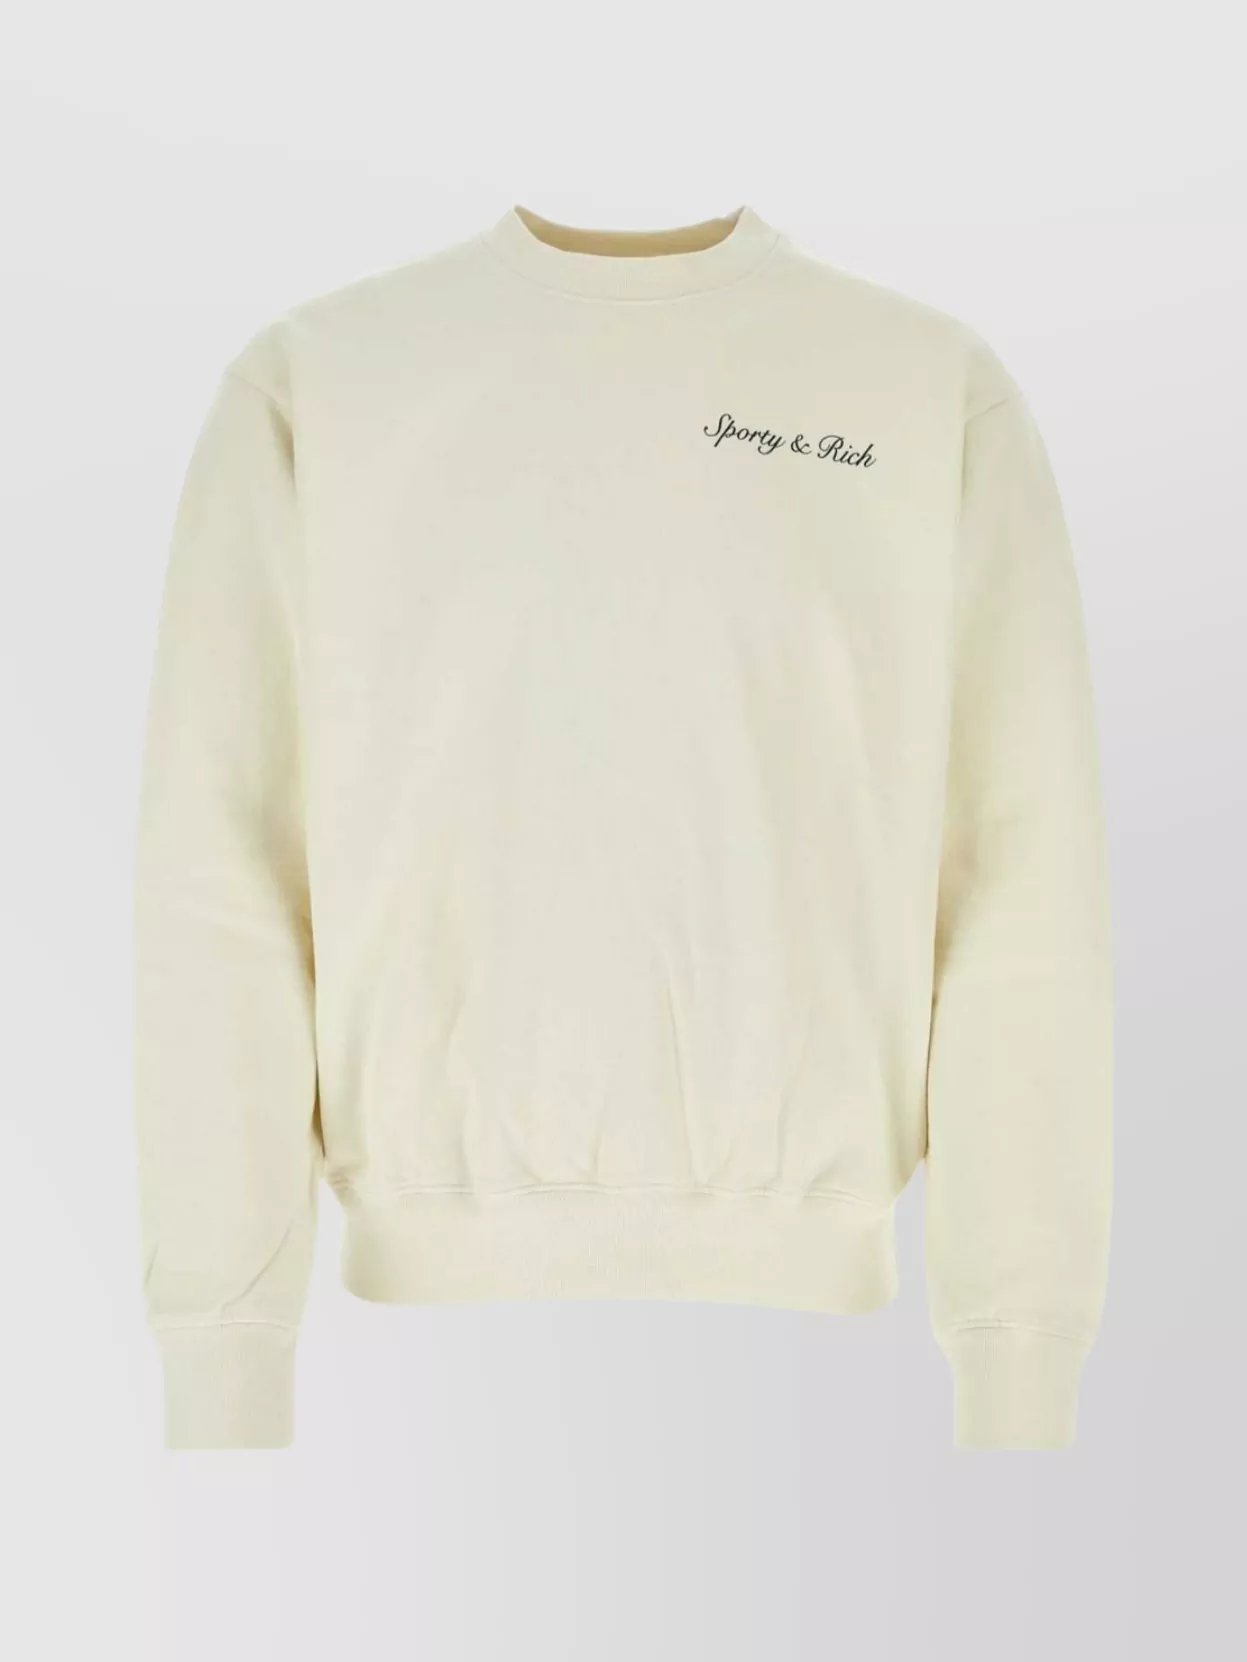 Sporty And Rich Cotton Crew Neck Sweatshirt In Neutral